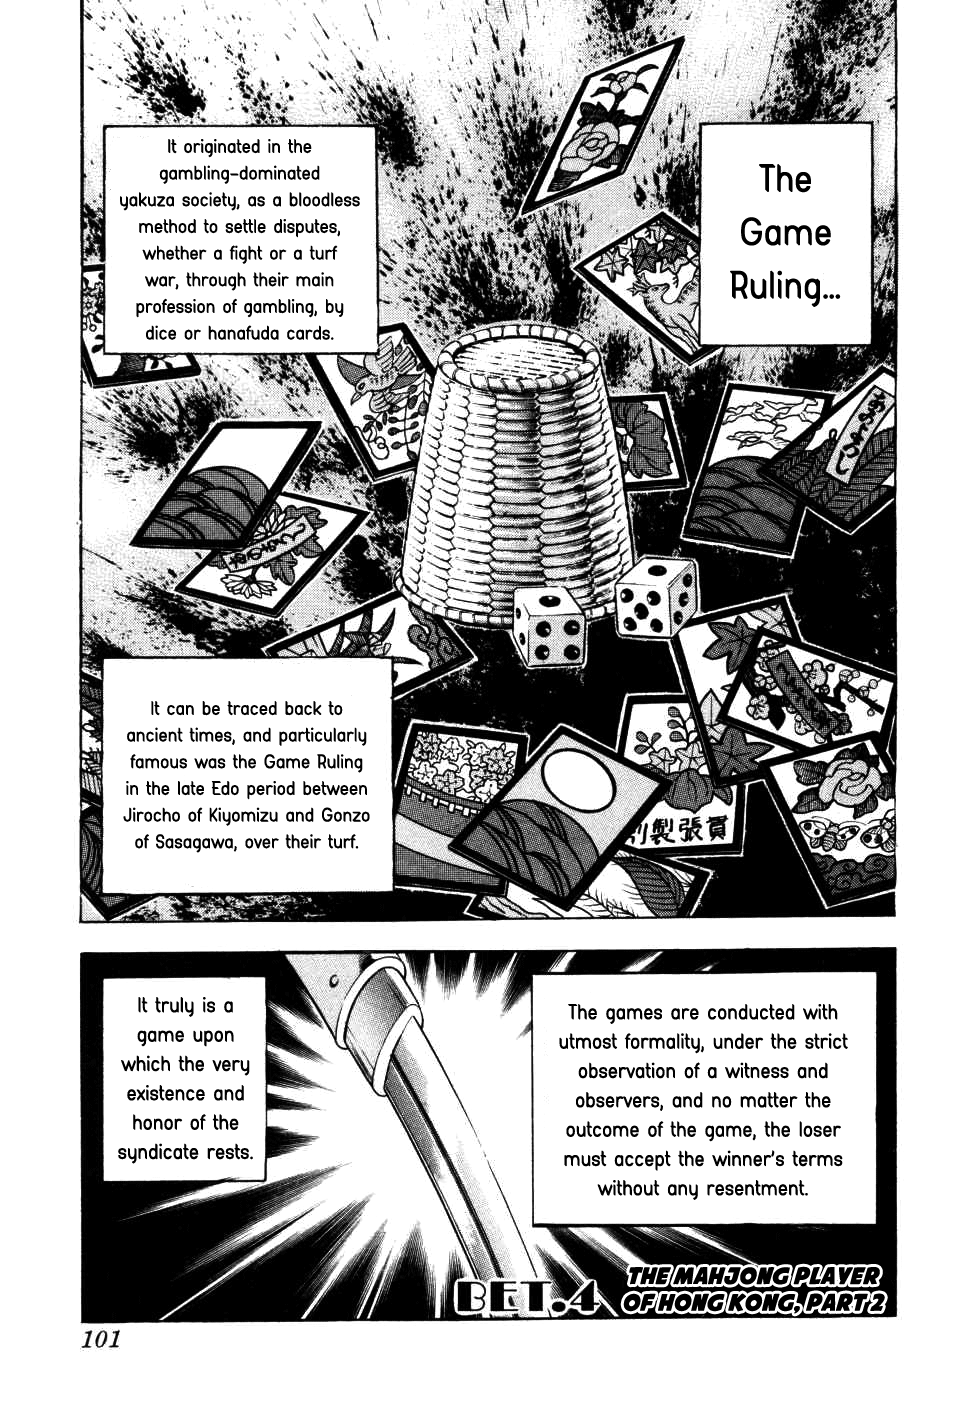 Legend Of The End-Of-Century Gambling Wolf Saga - Page 1